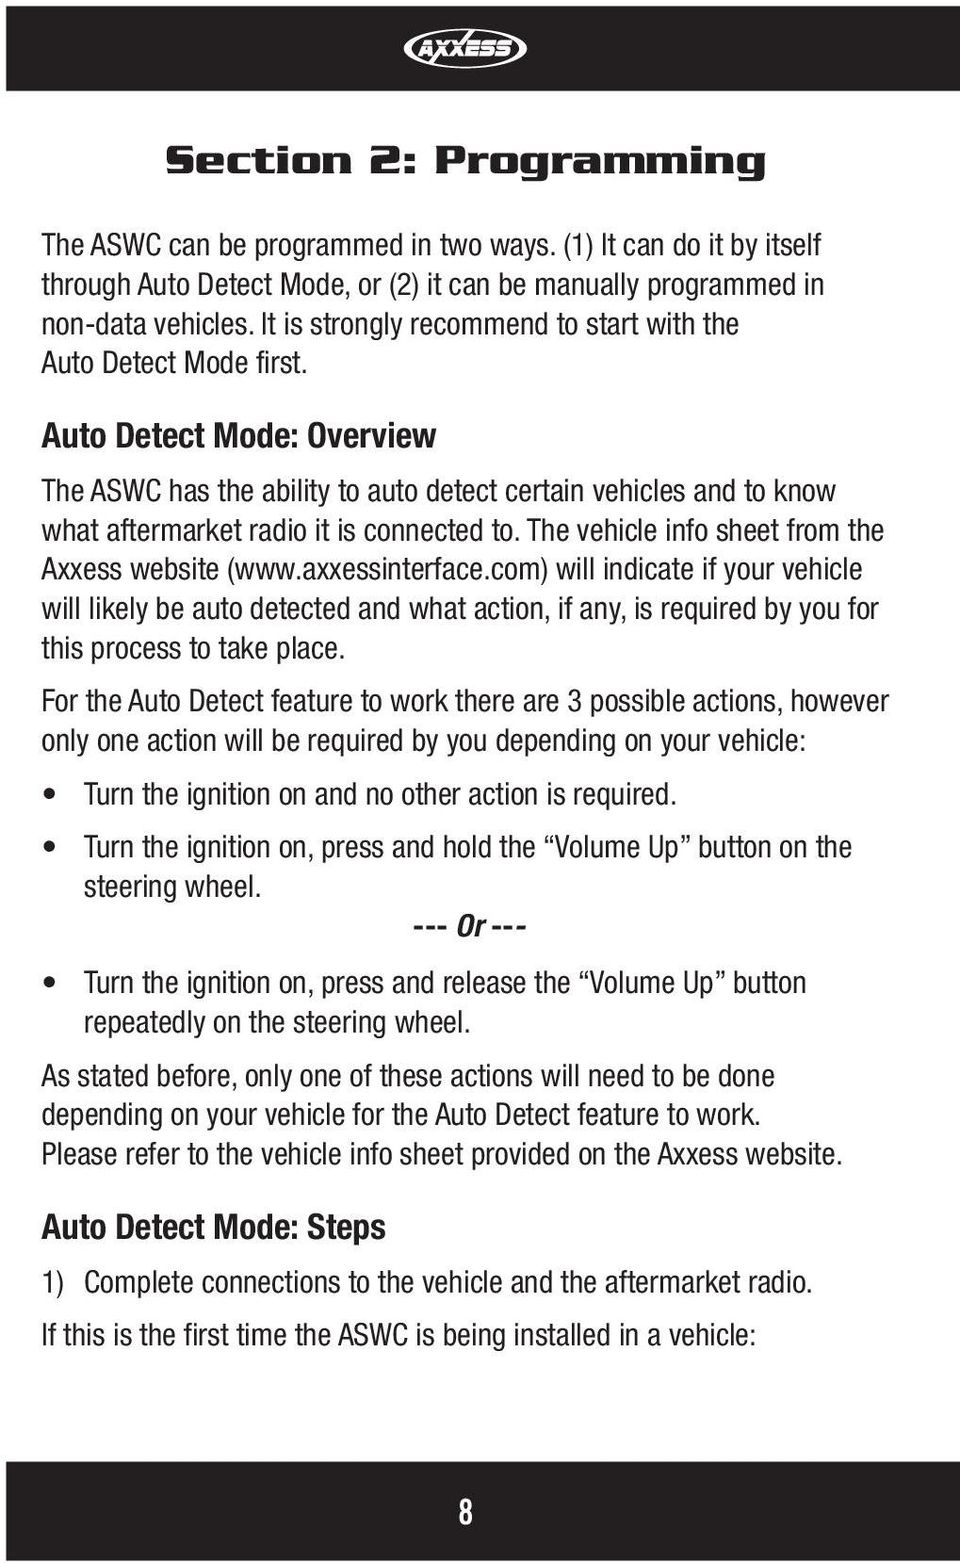 Auto Detect Mode: Overview The ASWC has the ability to auto detect certain vehicles and to know what aftermarket radio it is connected to. The vehicle info sheet from the Axxess website (www.